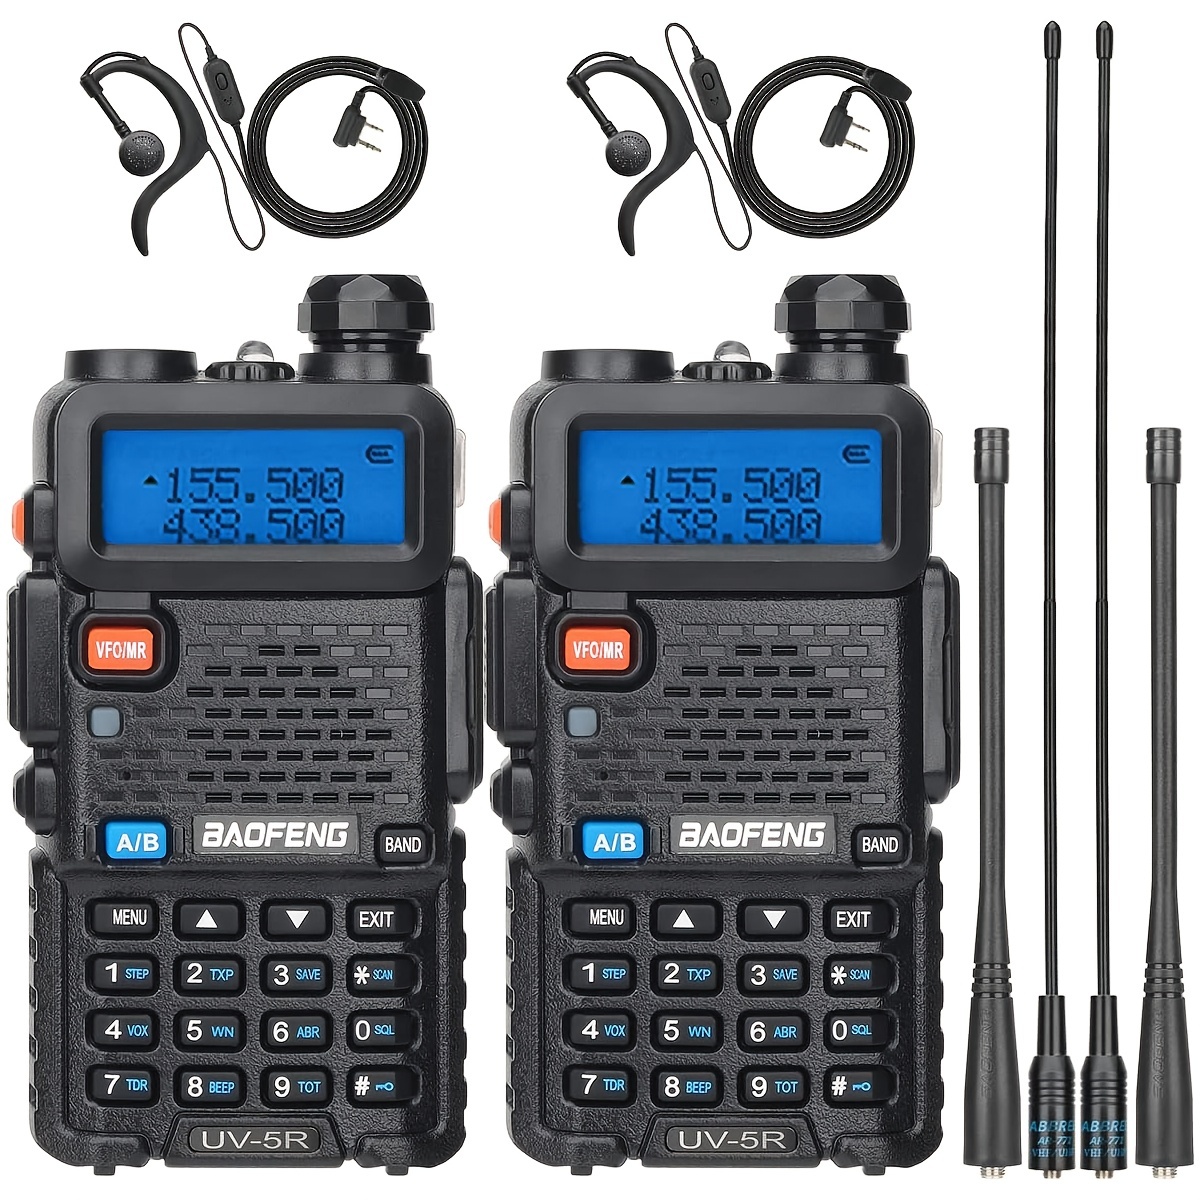 Baofeng BF-888S Upgrade Walkie Talkie Wireless Copy Frequency 16KM Long  Range Portable Ham Radio Transceiver for Camping Hunting